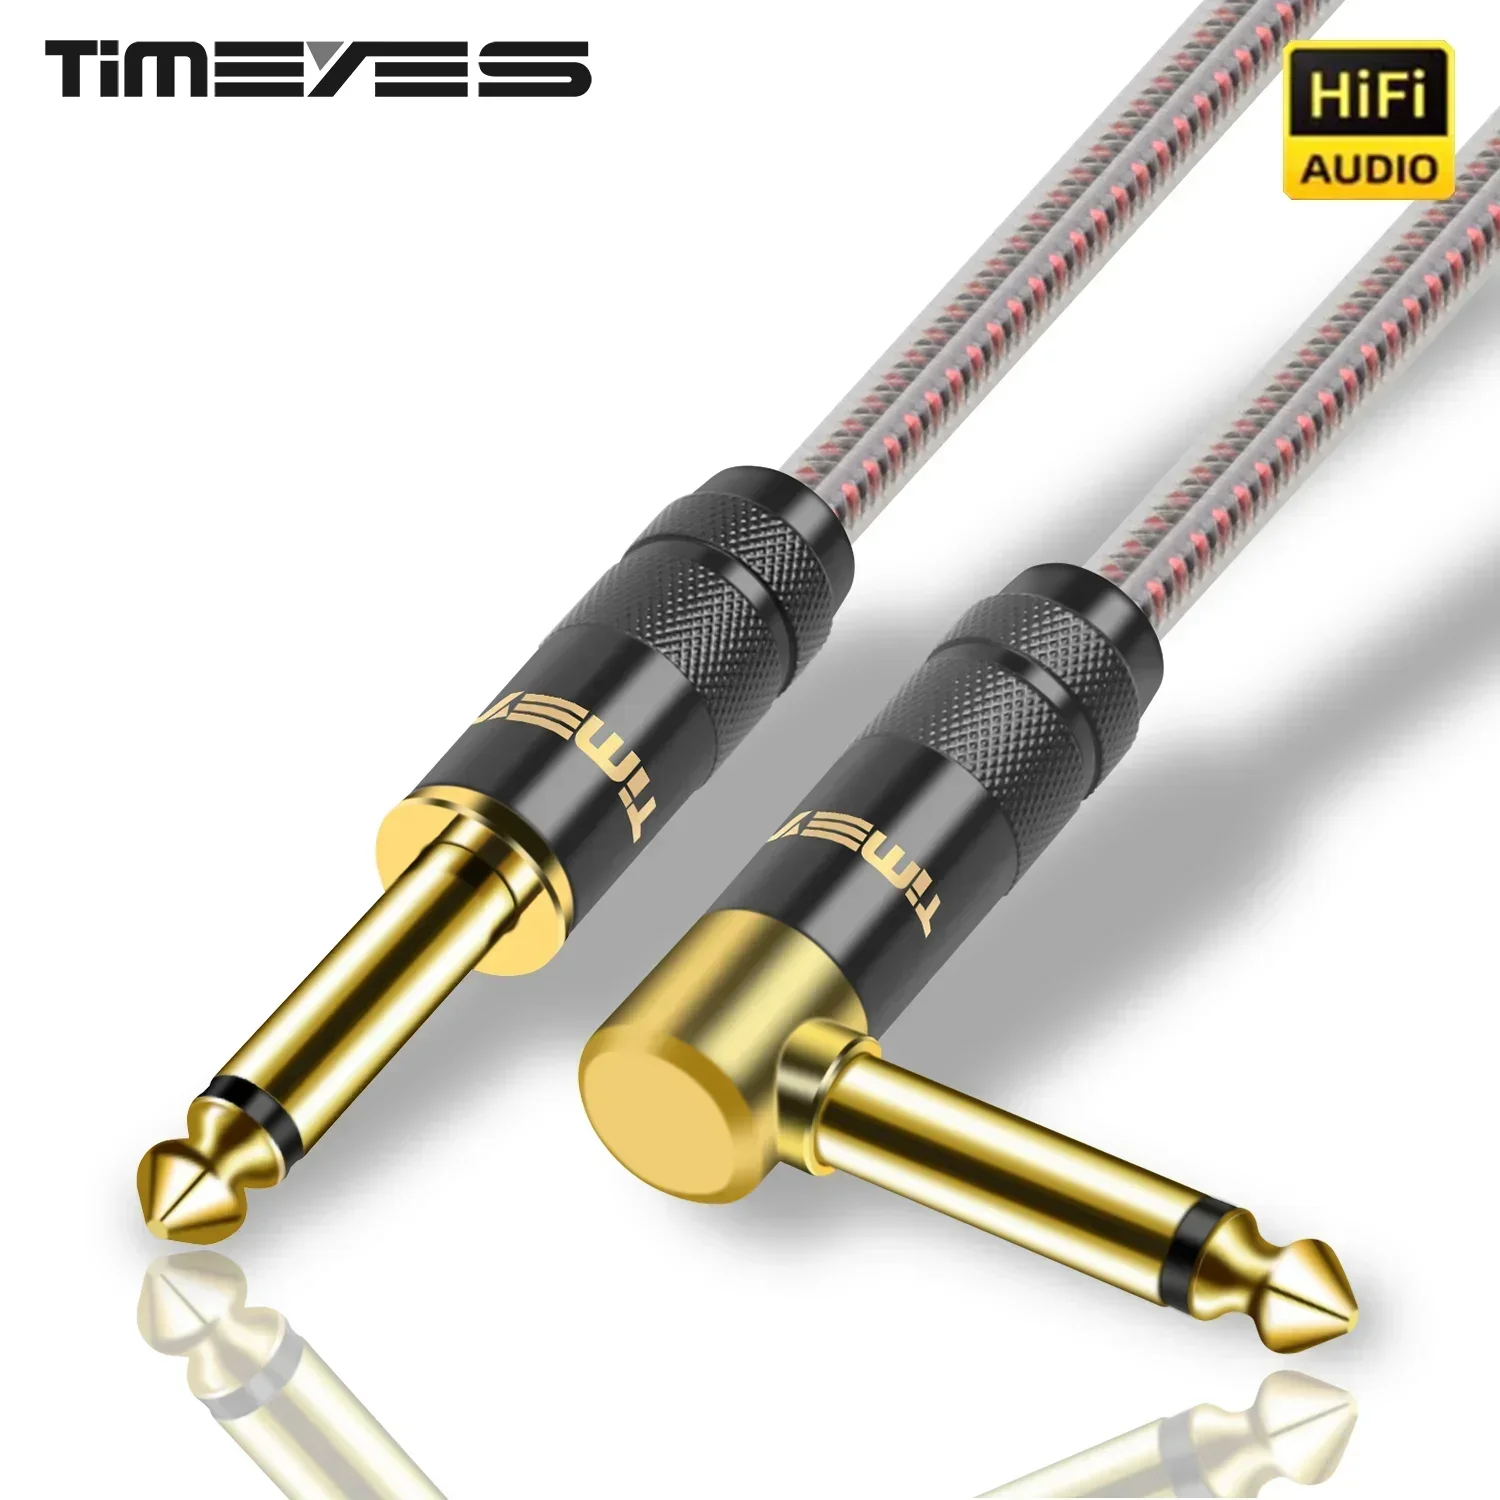 

6.35mm TS Audio Cable 1/4 Inch Right Angle Instrument Cable Professional Electric Guitar Cord for Amplifier Preamp Mixer Speaker